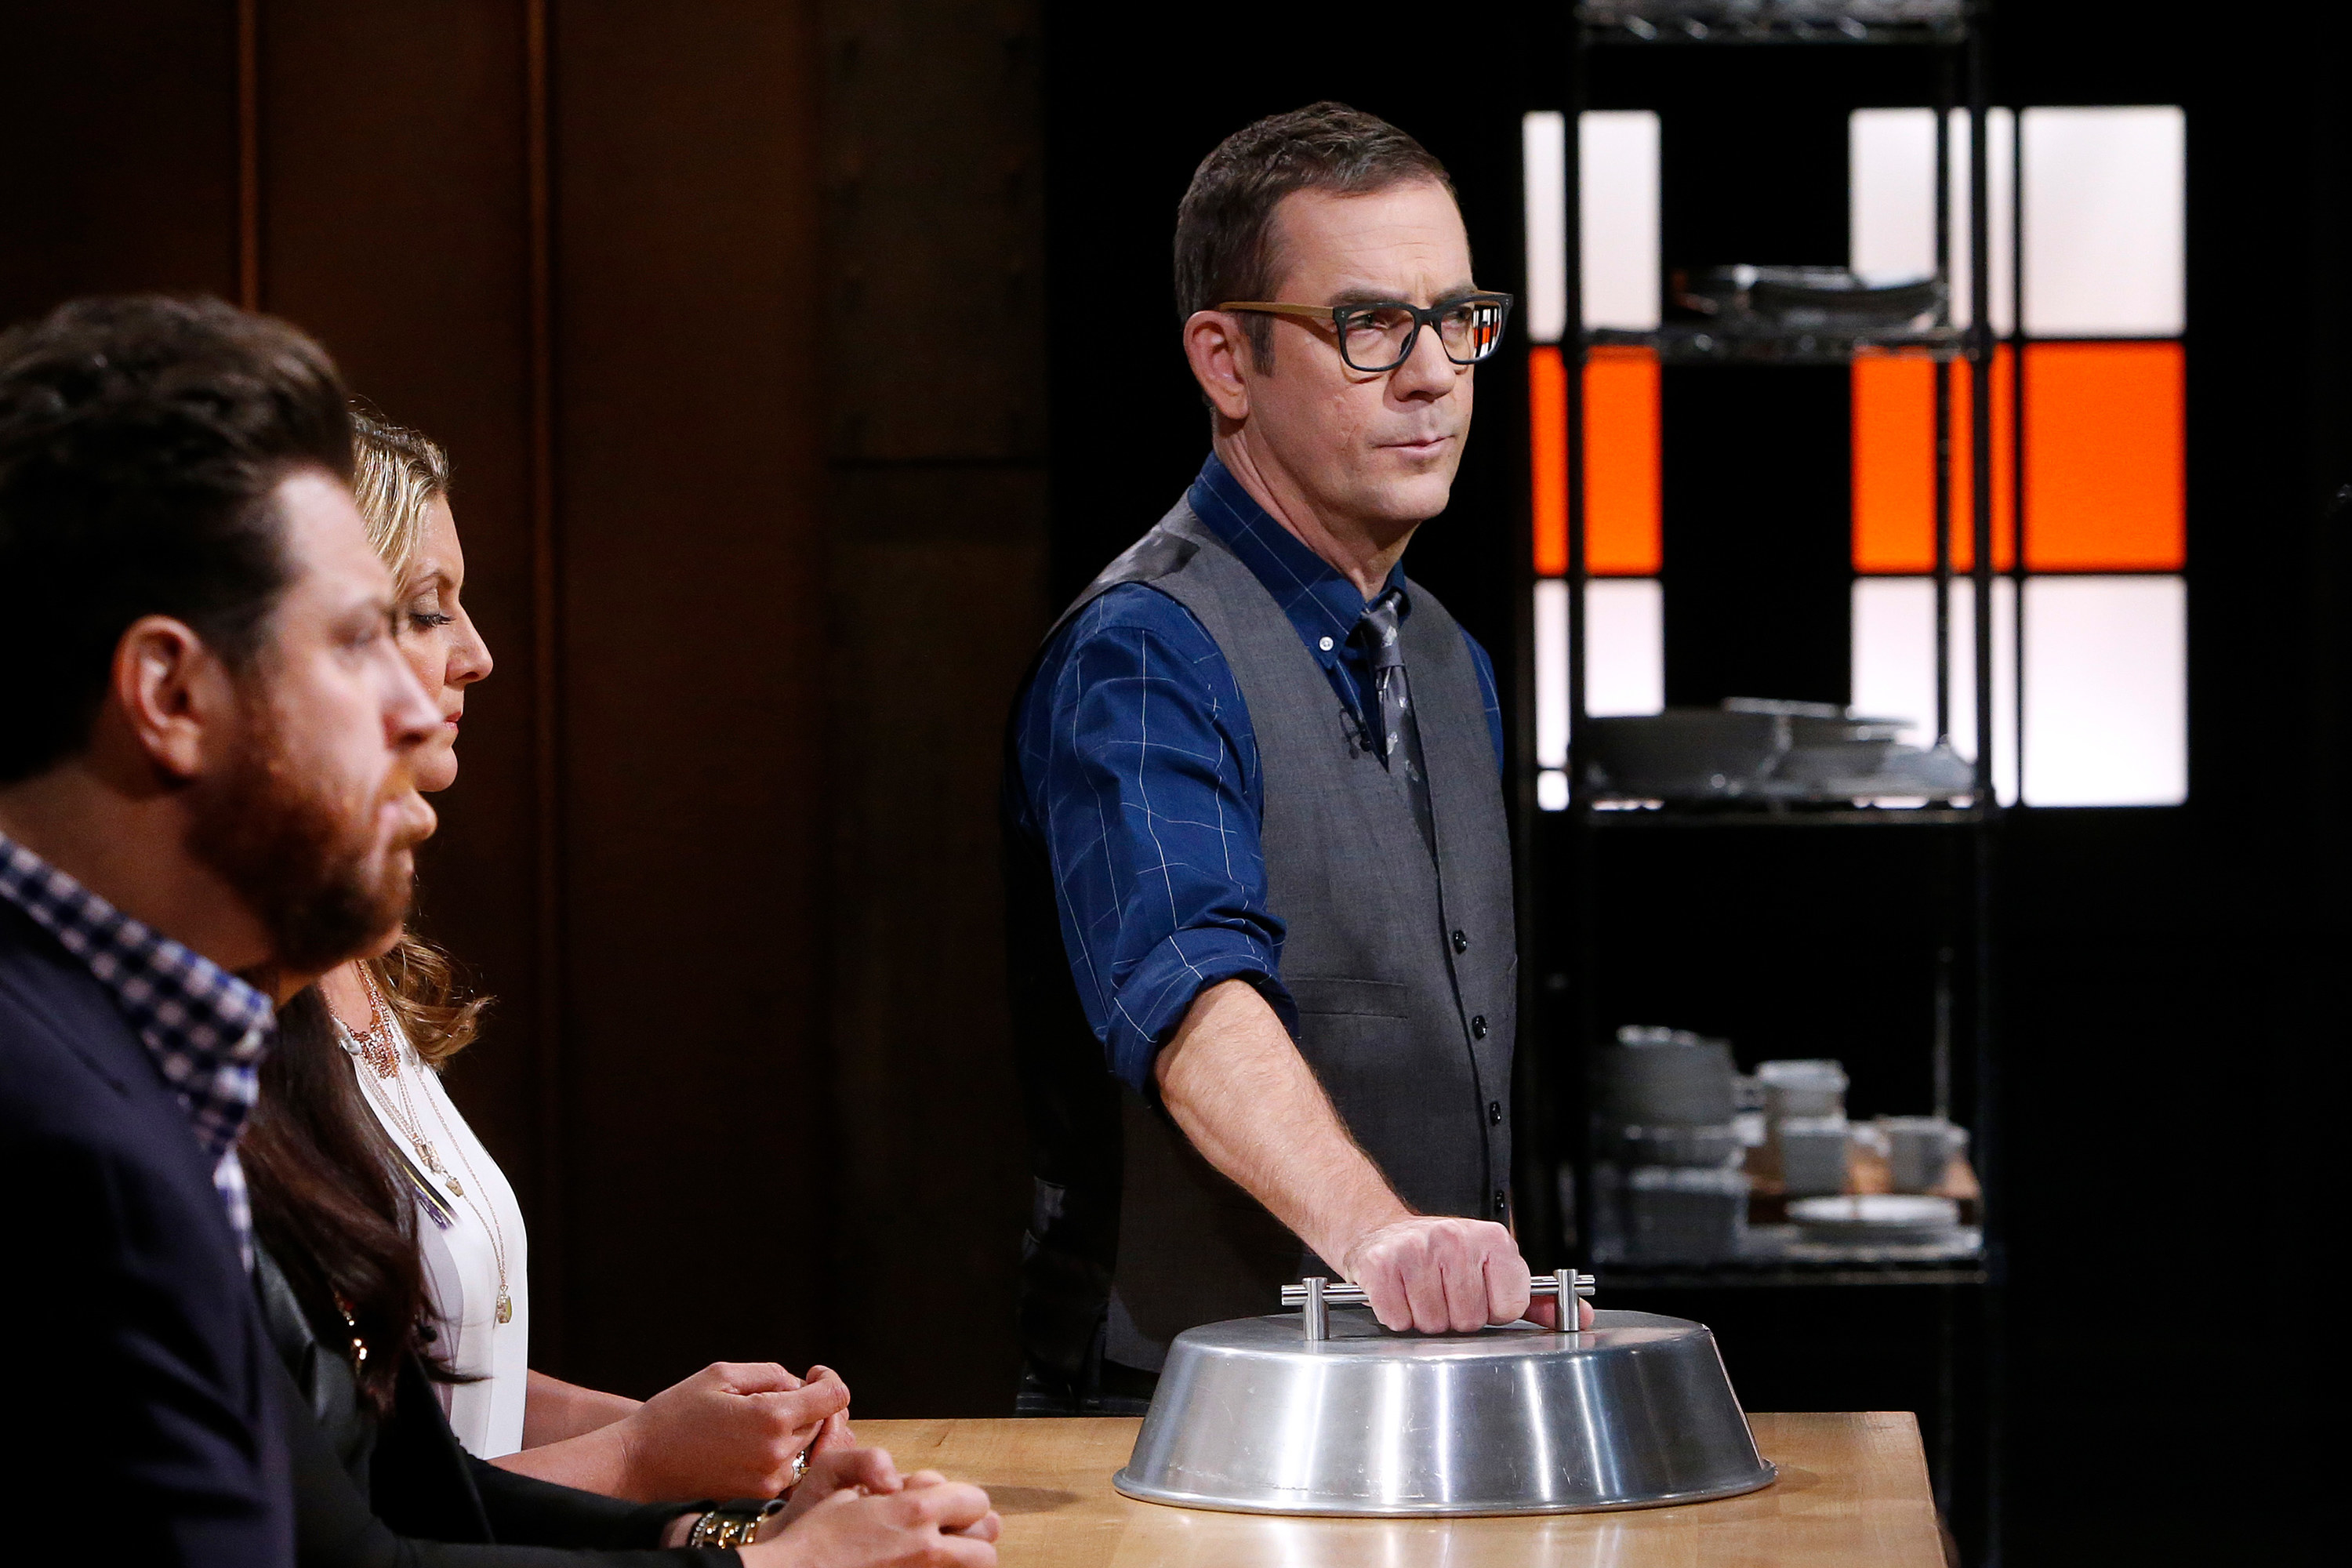 Ted Allen unveiling the losing dish